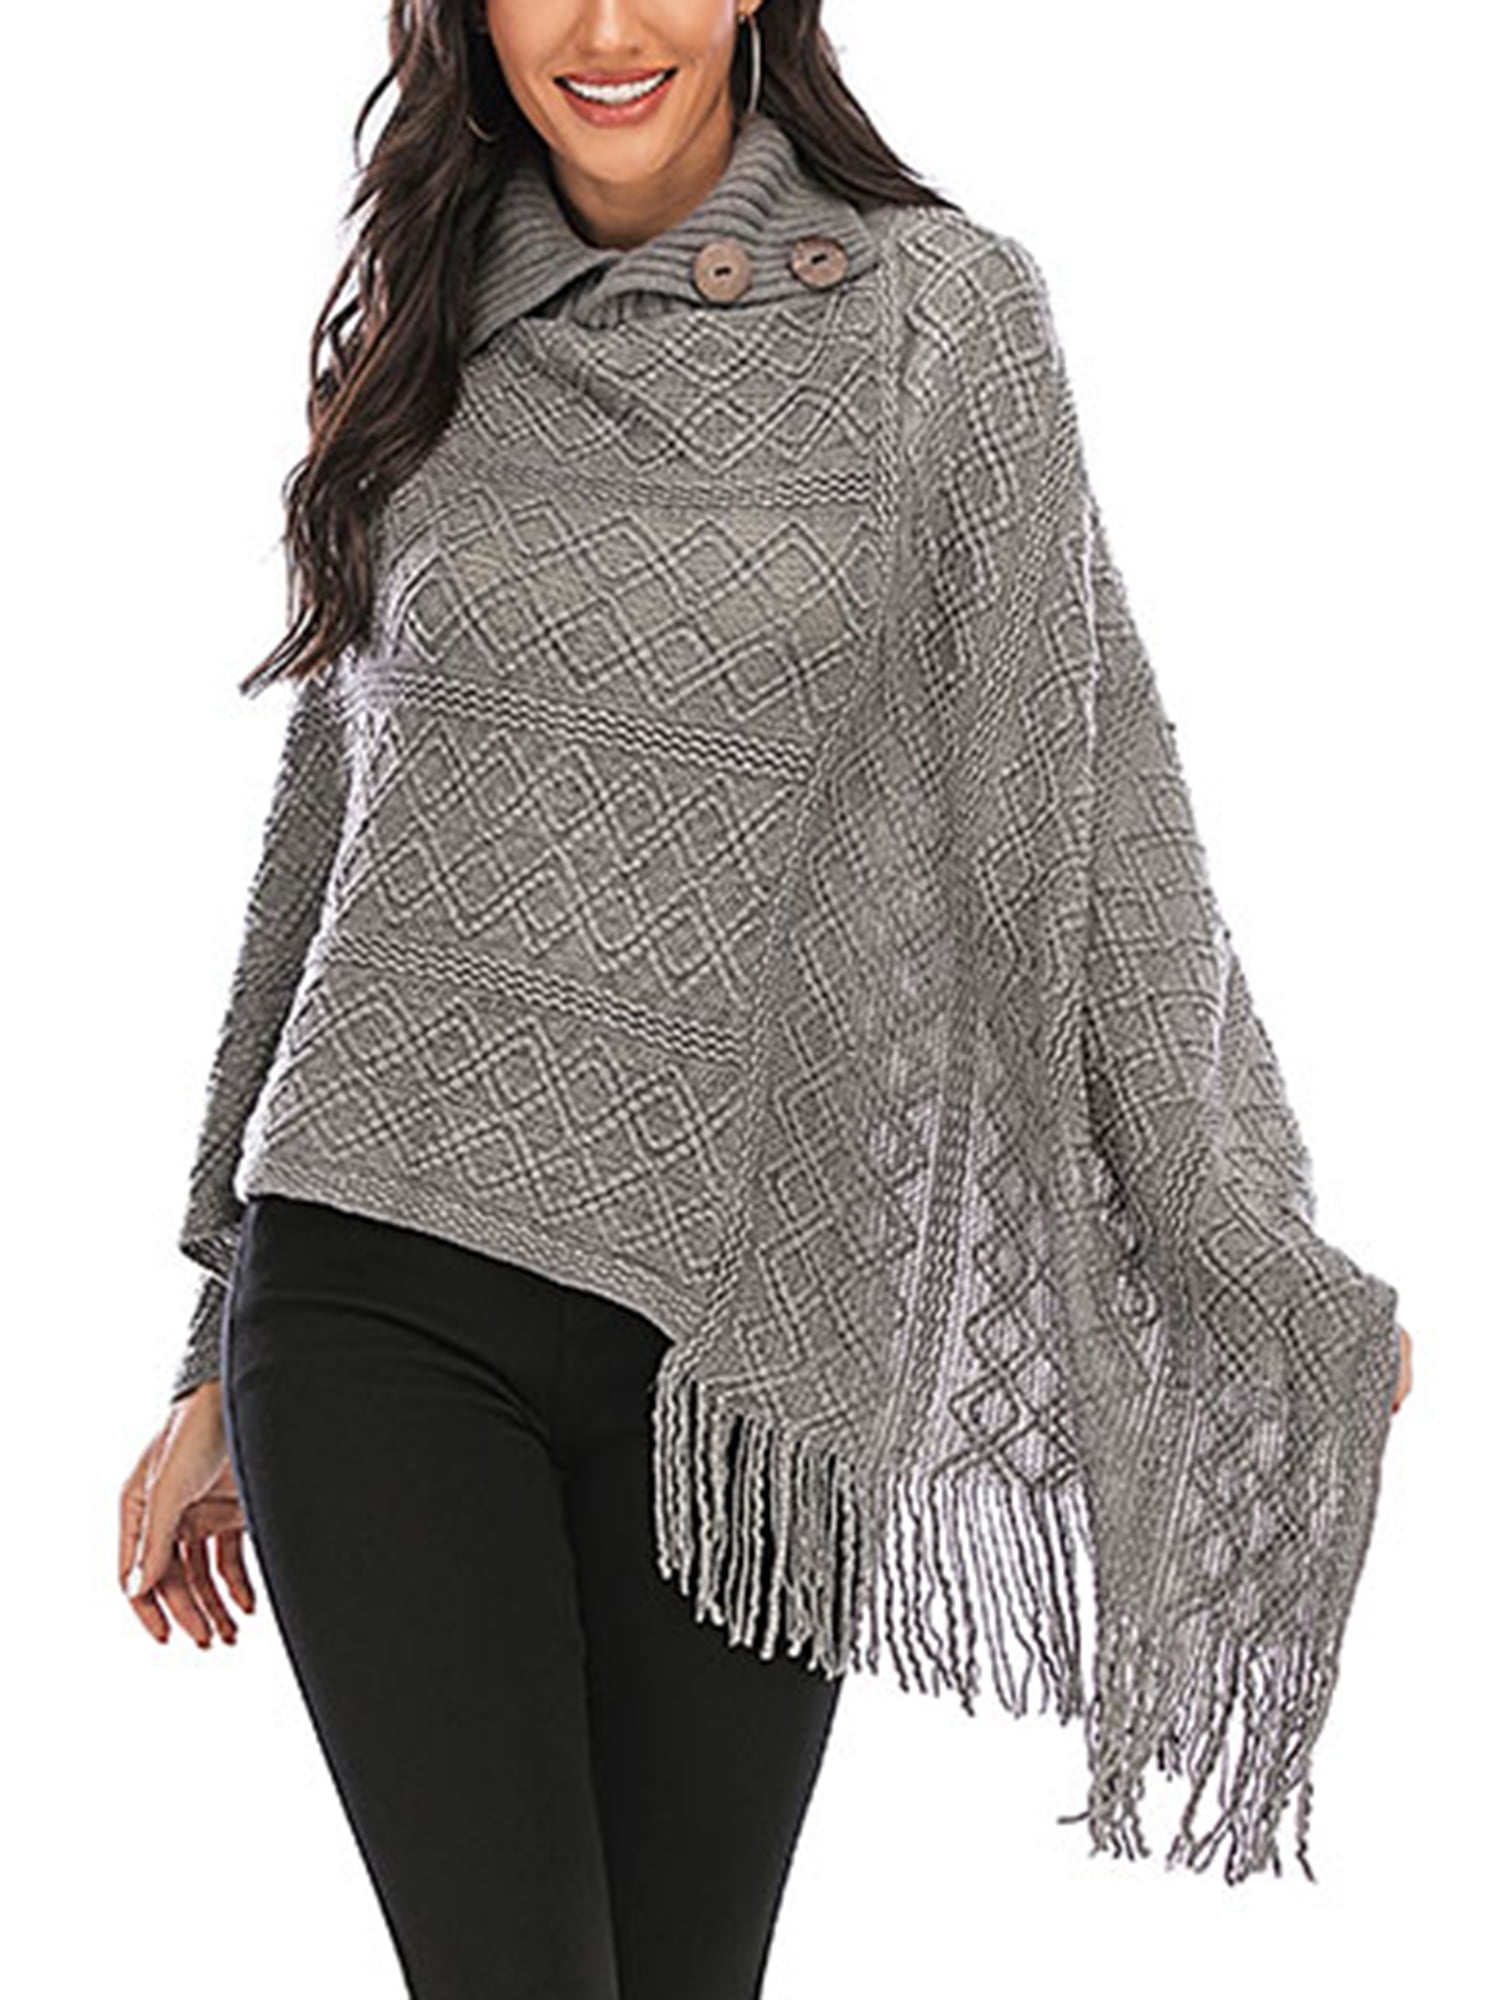 Jaeounr Women Casual Loose Turtleneck Knitted Poncho Pullovers Sweater Top